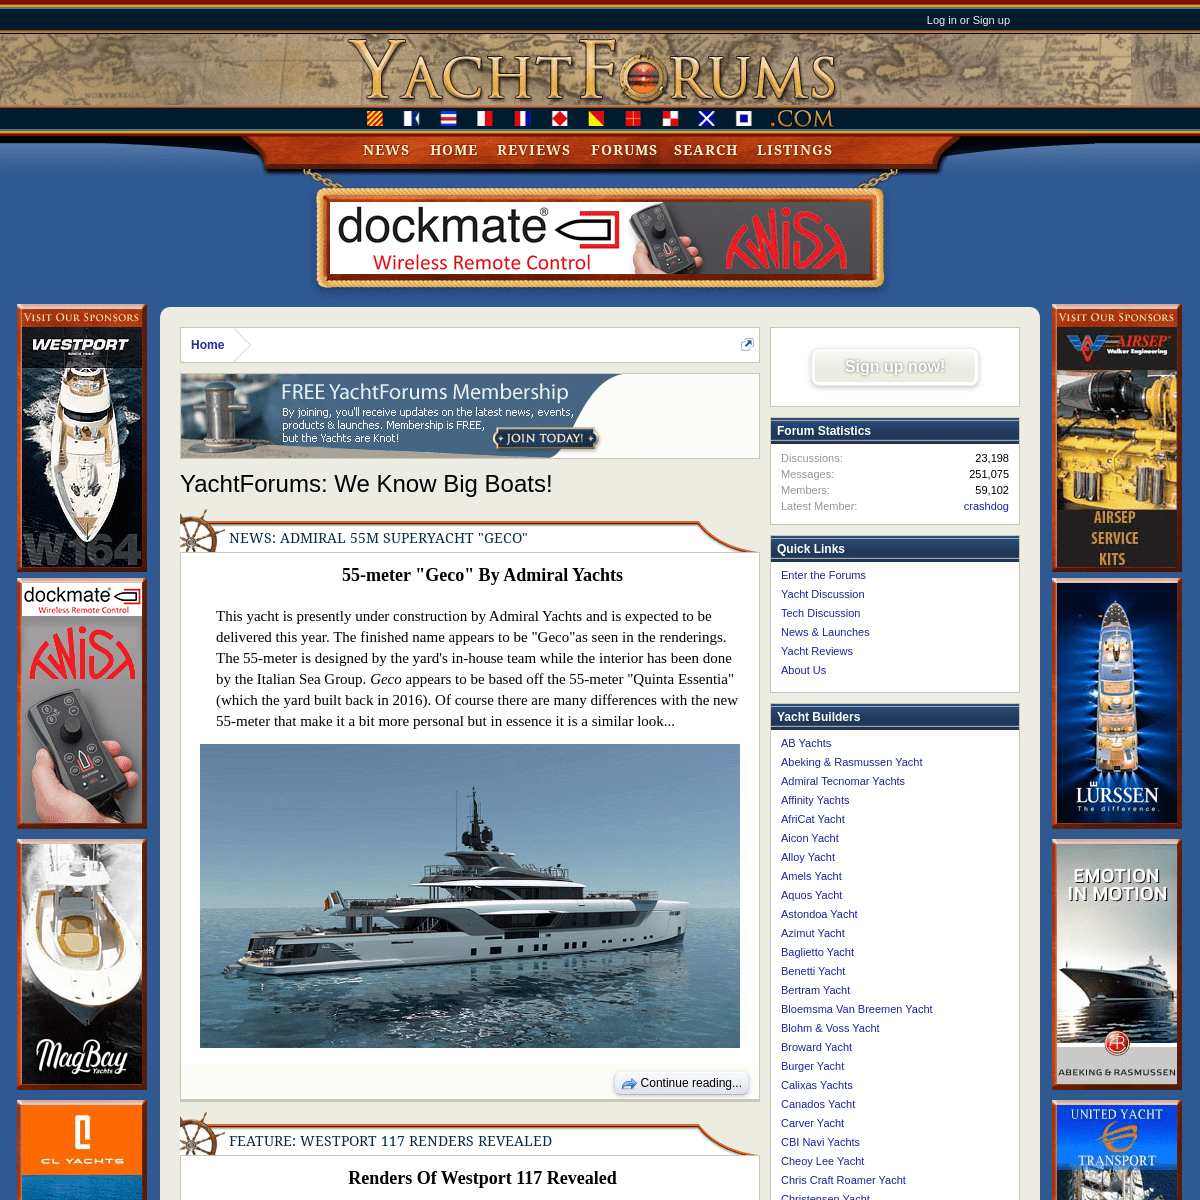 A complete backup of yachtforums.com